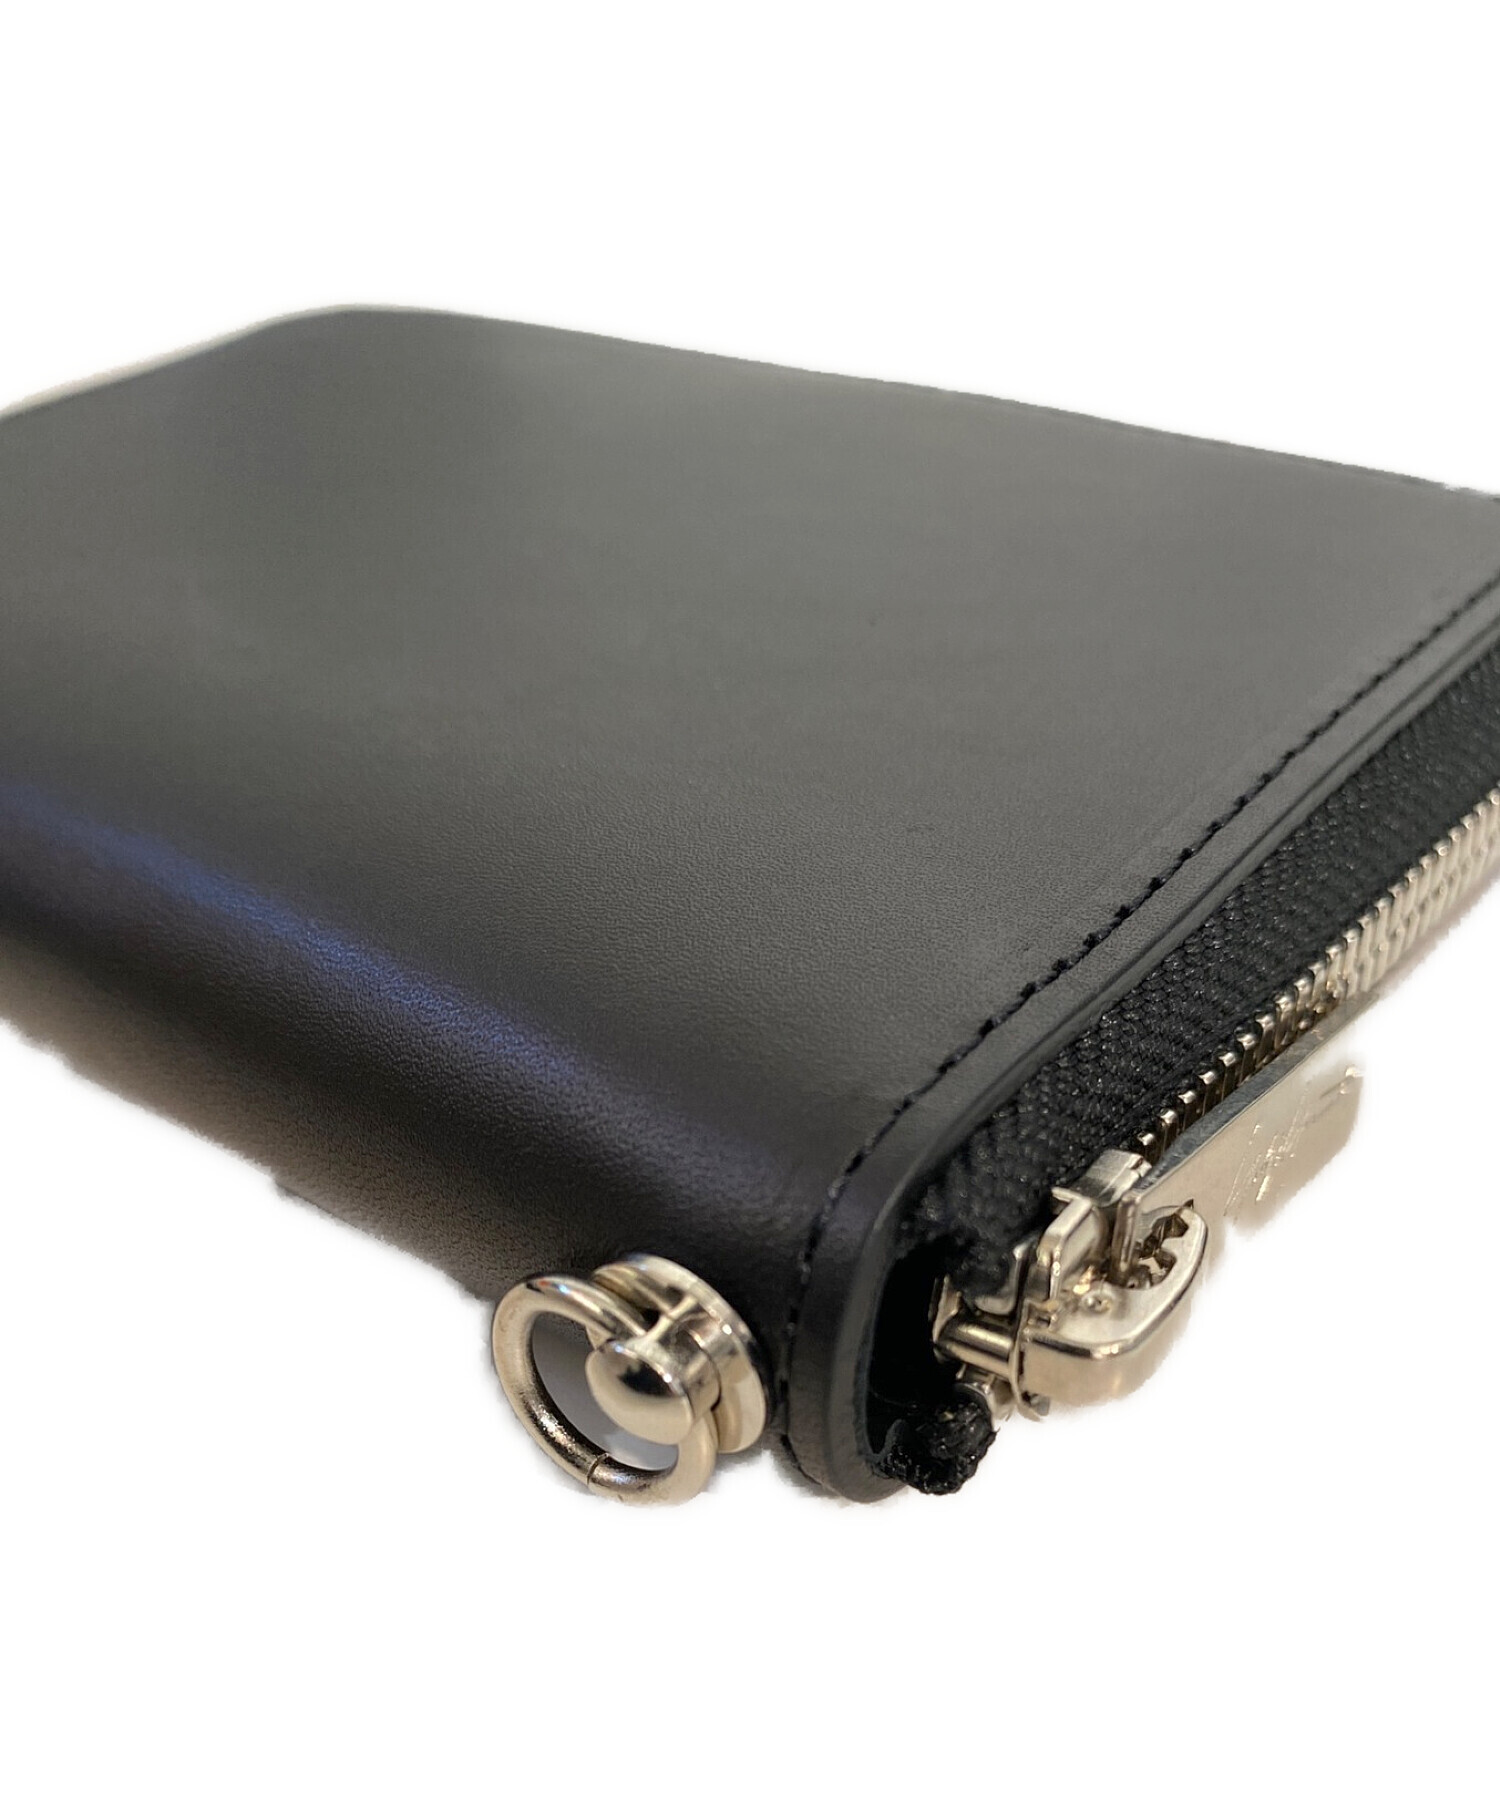 Yohji Yamamoto pour homme (ヨウジヤマモト プールオム) THICK NATURAL FASTENER WALLET S